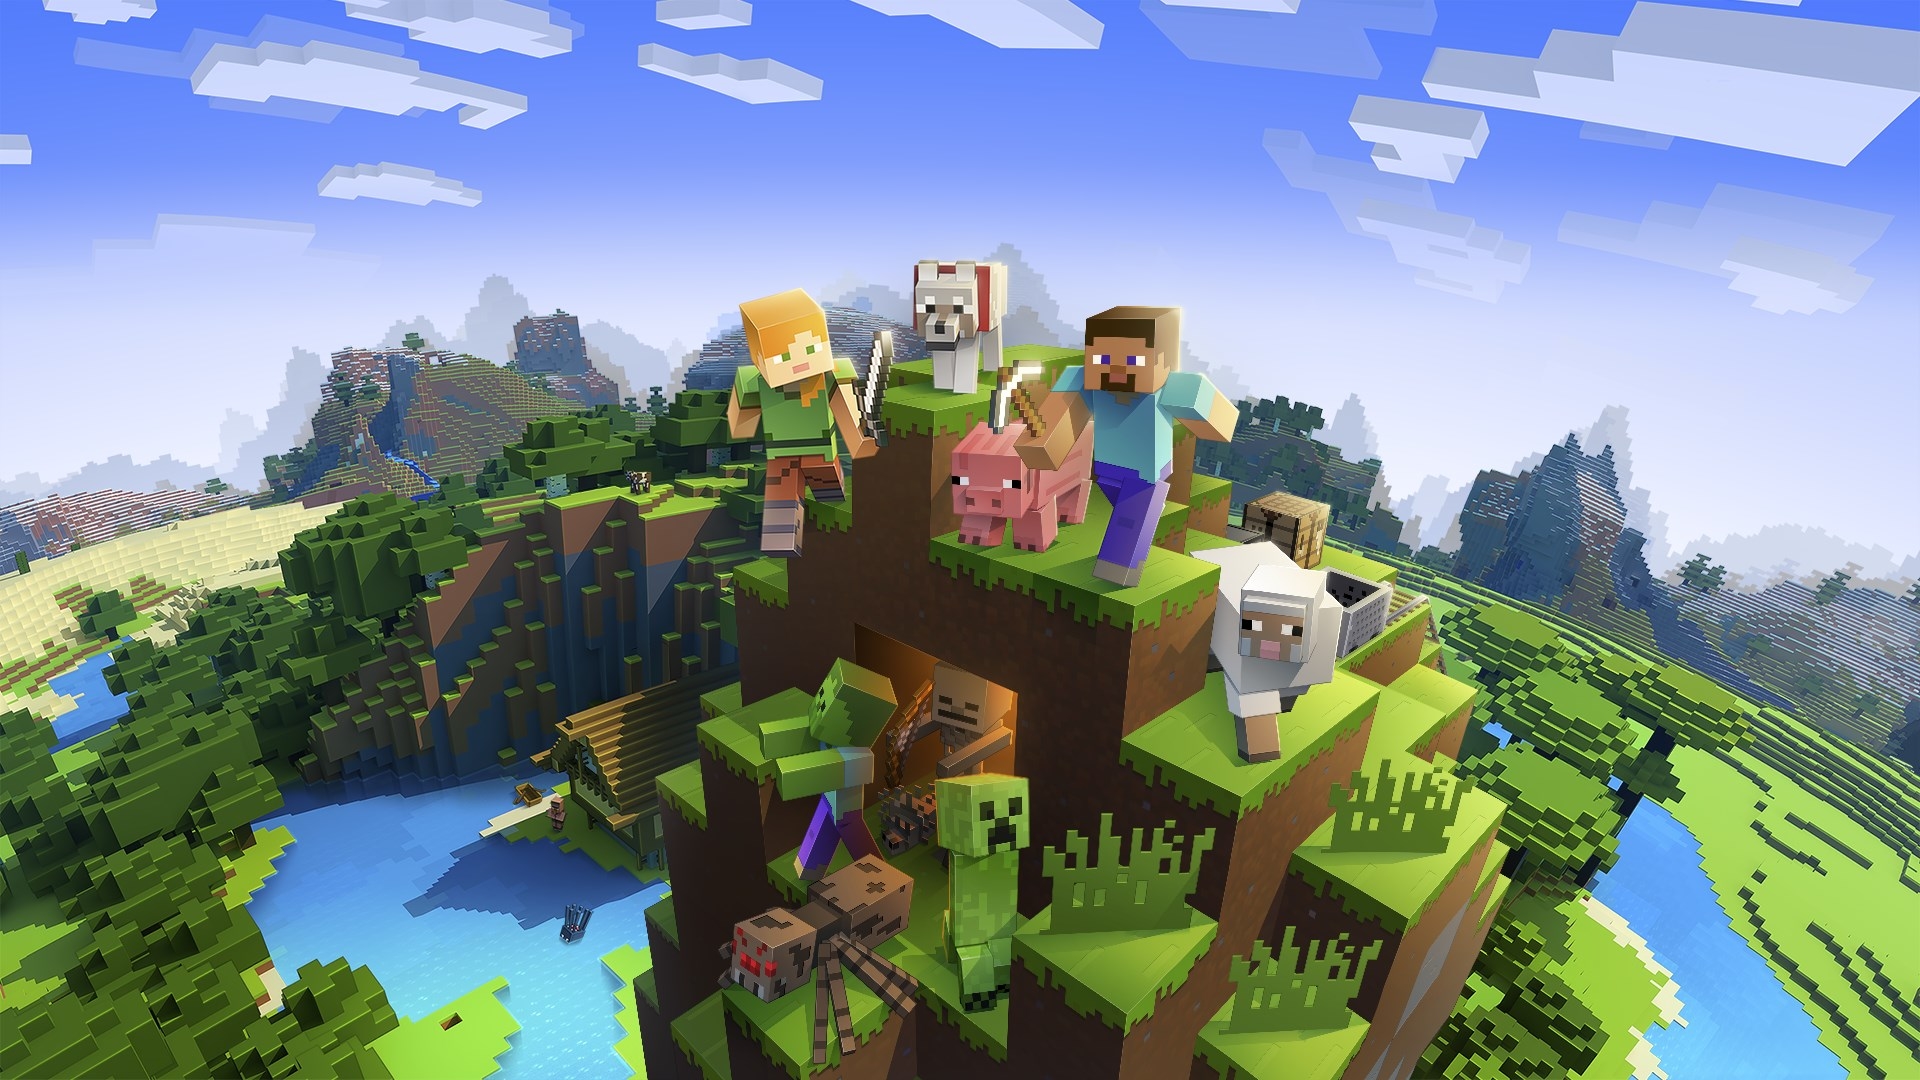 Minecraft 2 release date, news, and mods – all the latest details | PCGamesN